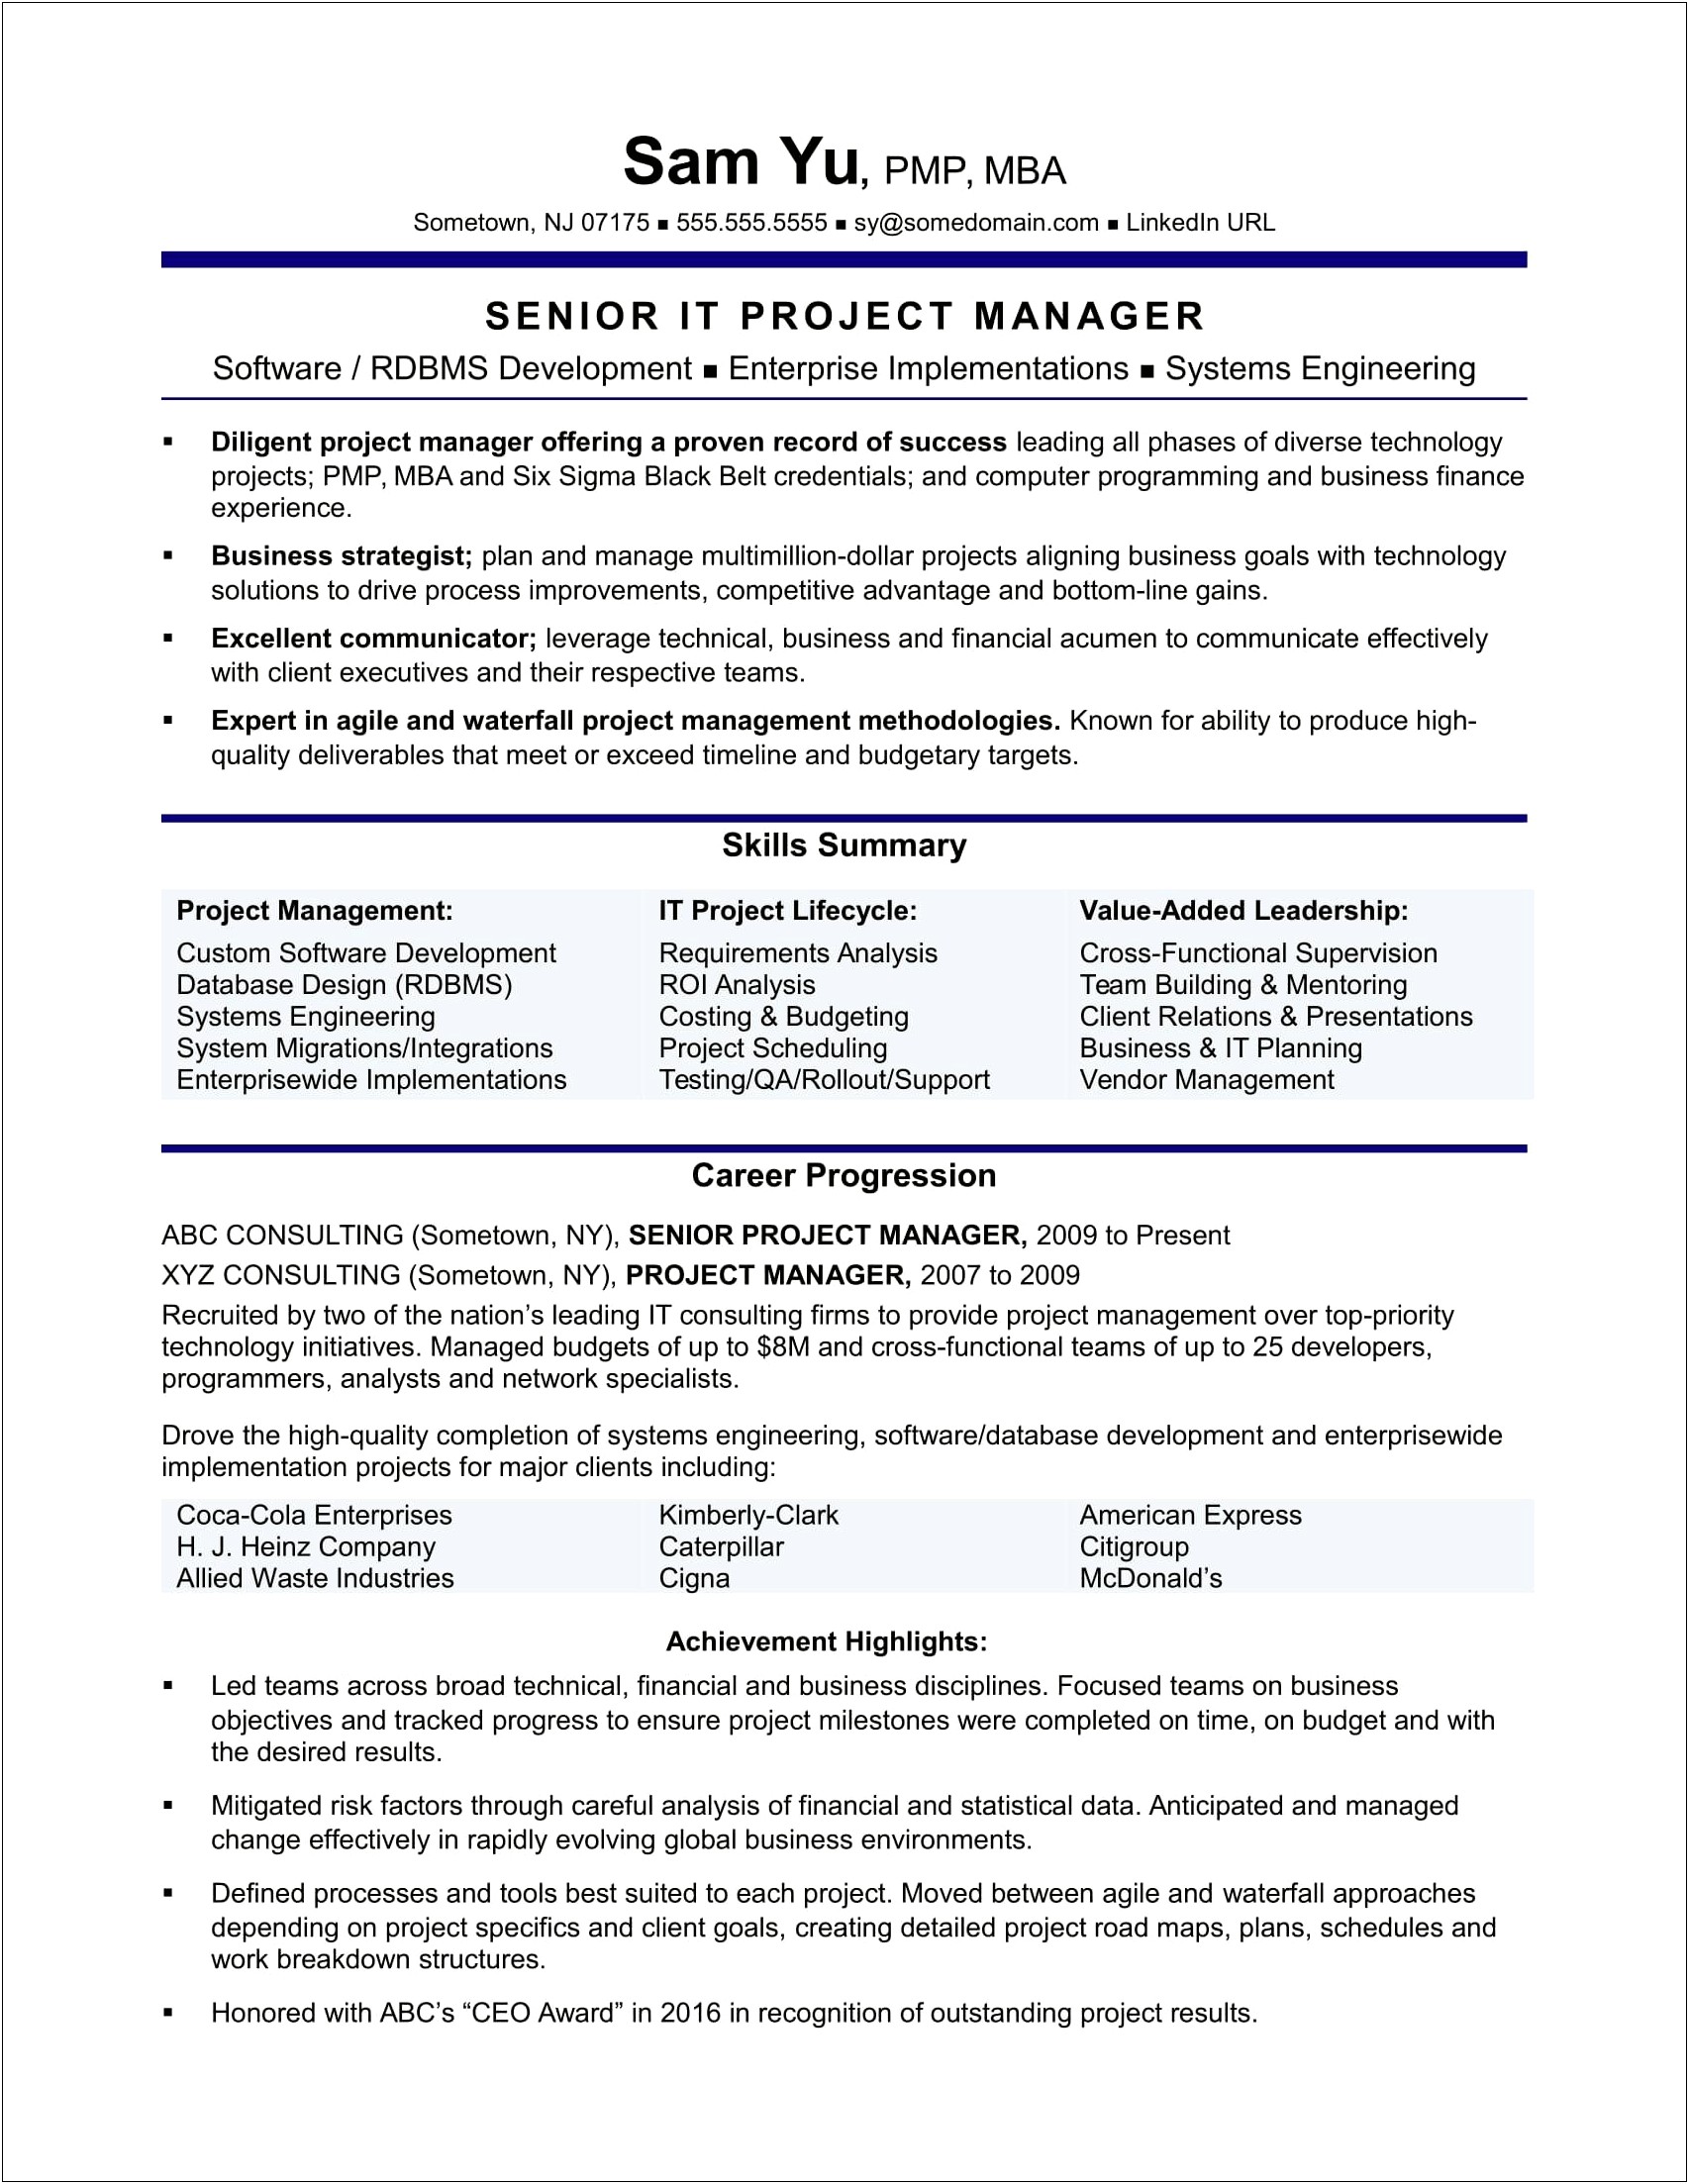 Sample Resume To Managing Operations Projects Worth Millions